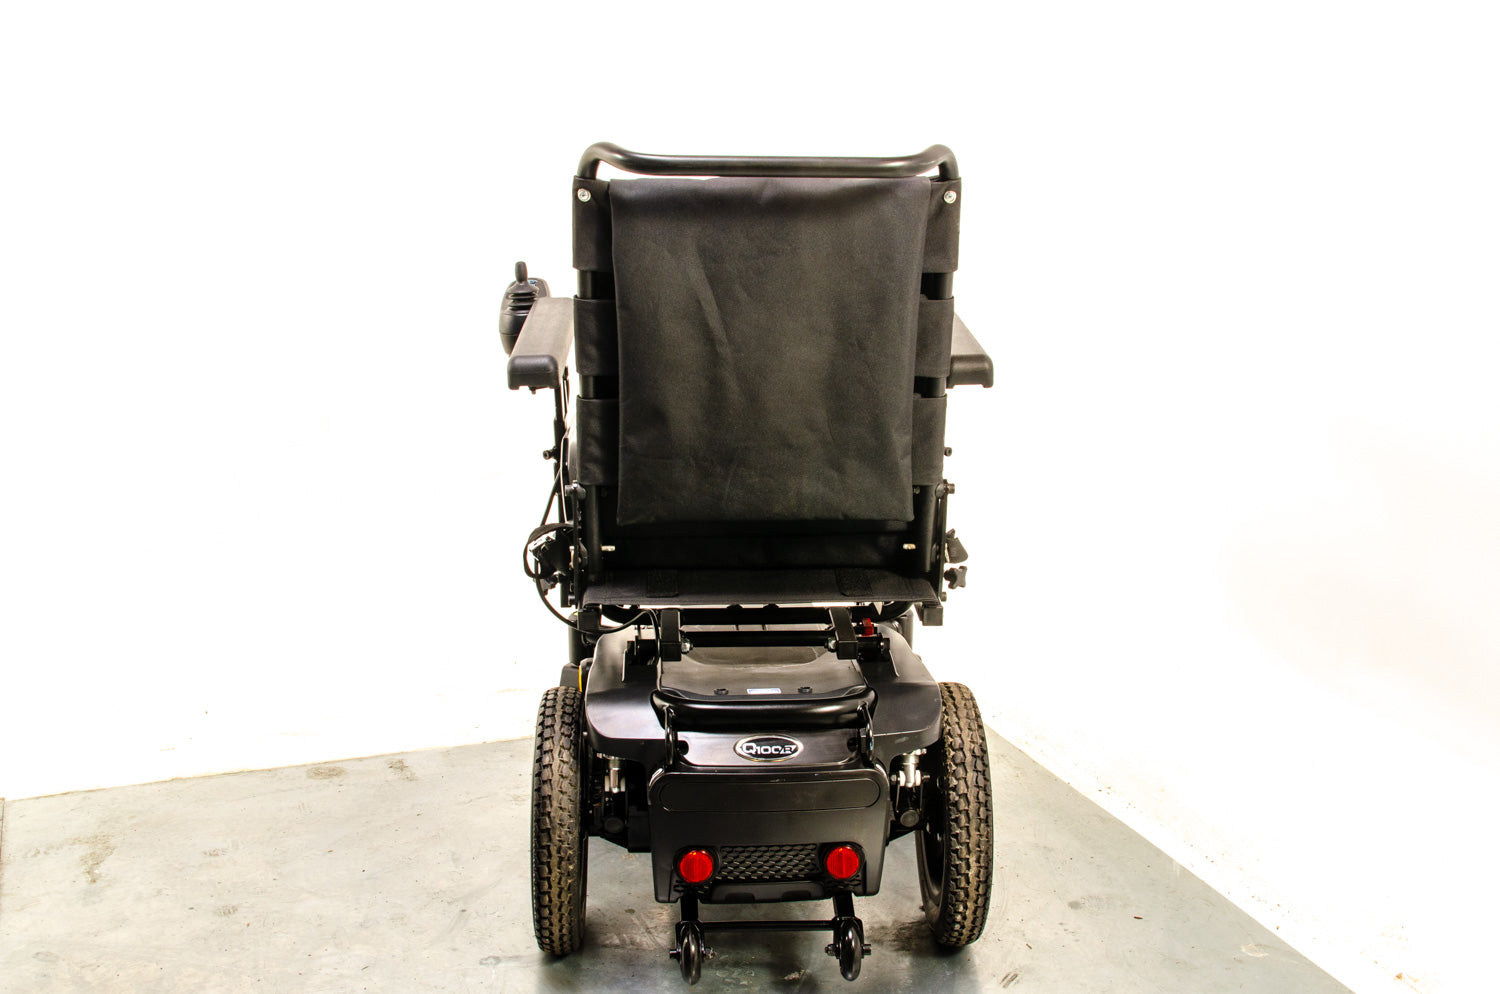 Quickie Q100 R Compact Indoor Outdoor Powerchair Wheelchair Sunrise Medical